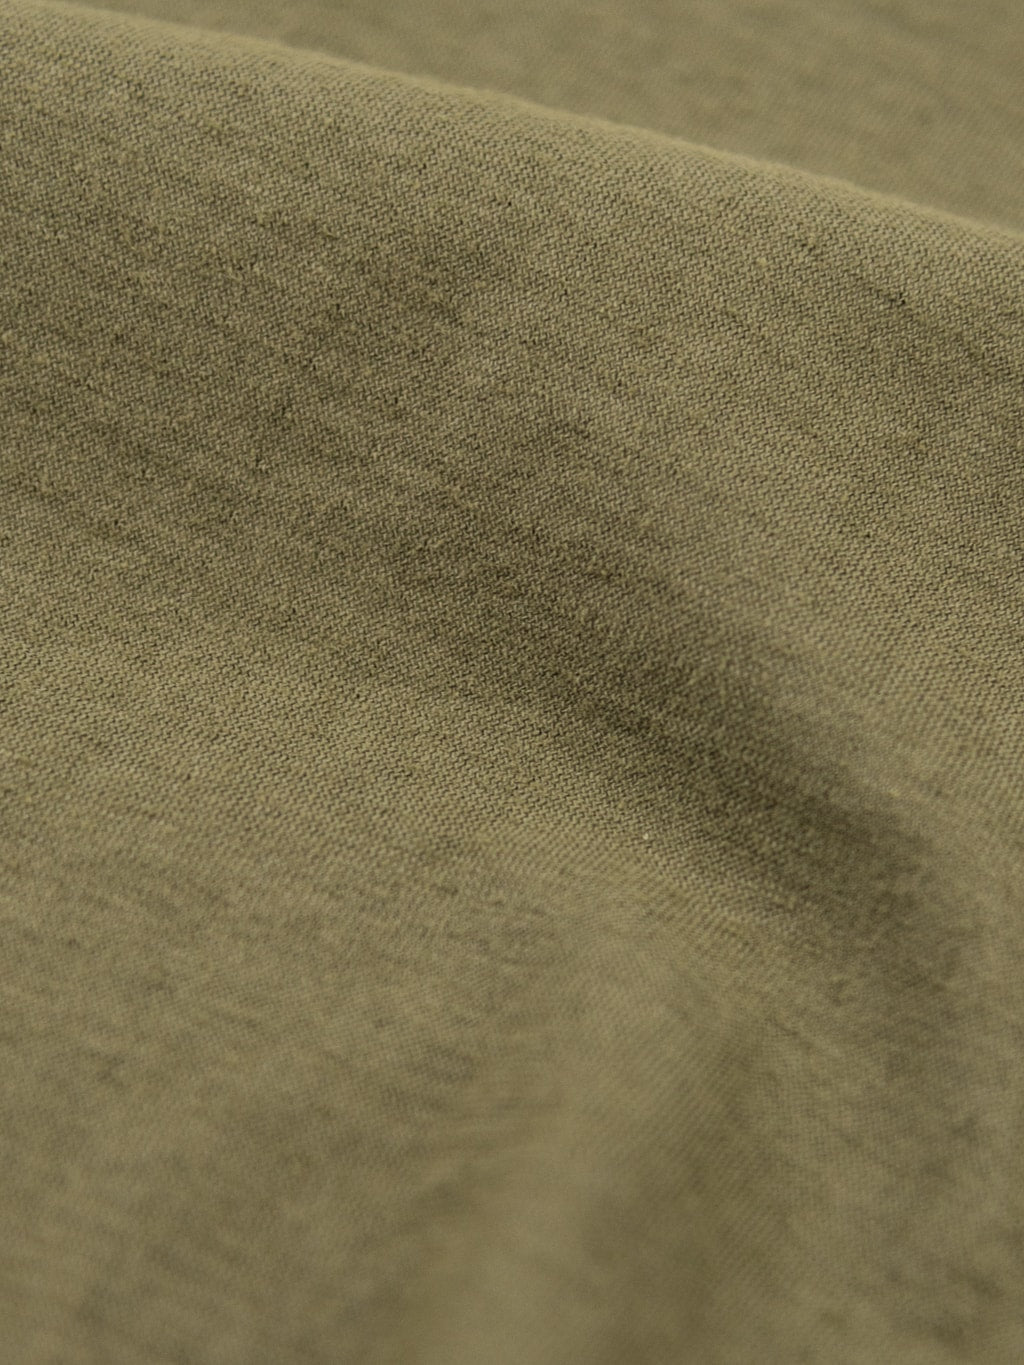 Loop and Weft Dual Layered Knit raw edge pocket TShirt olive midweight